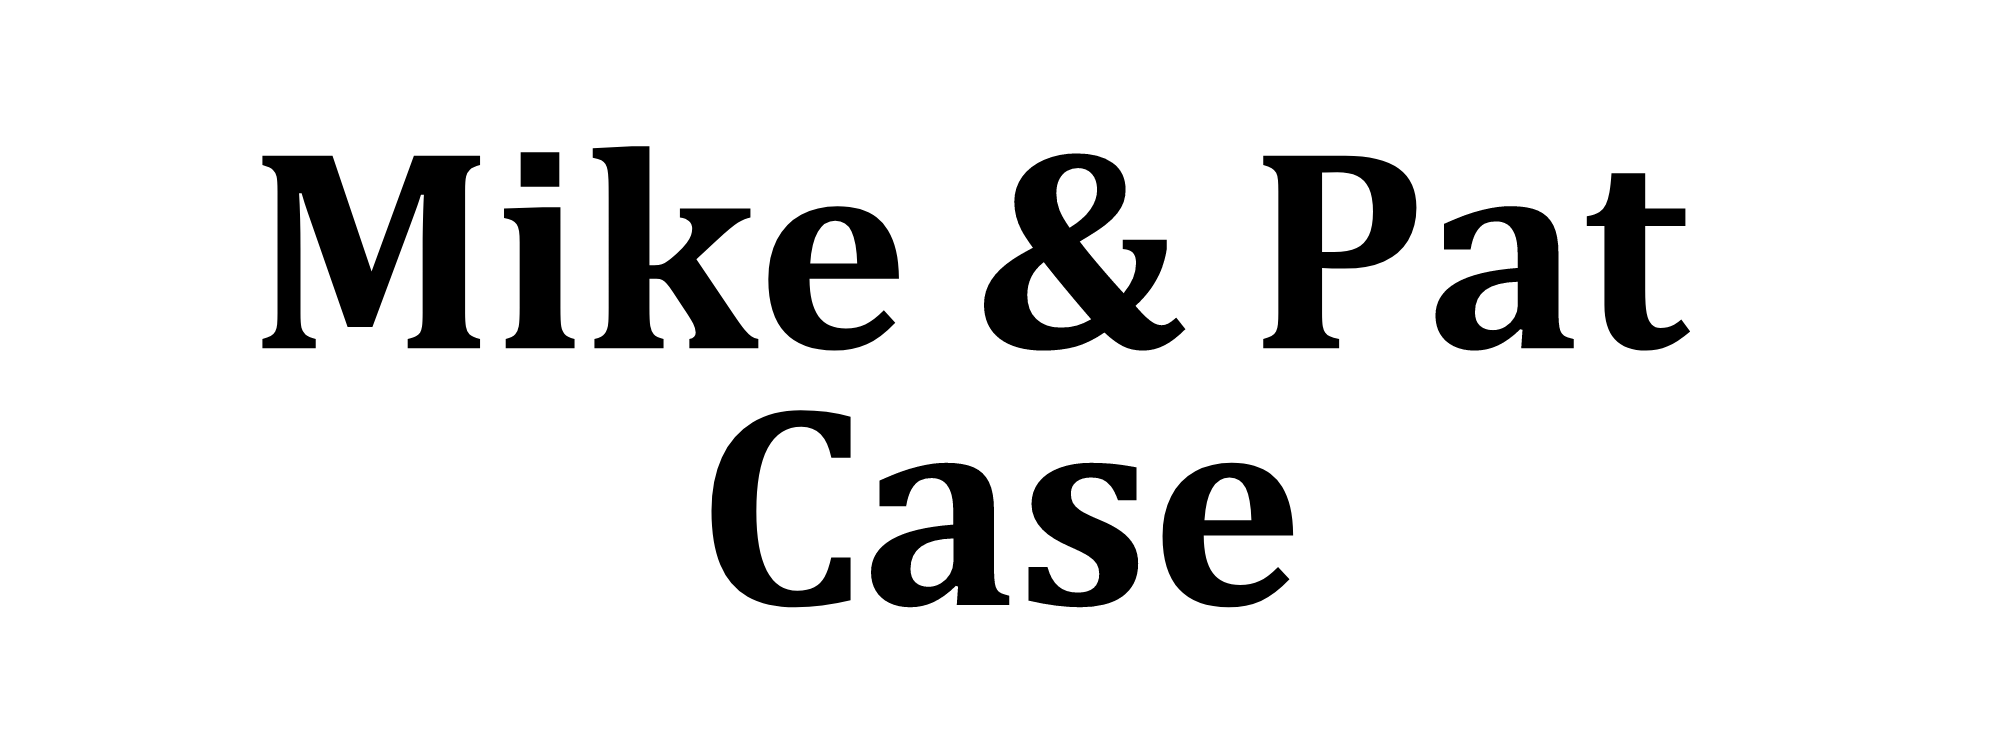 Mike and Pat Case logo.png